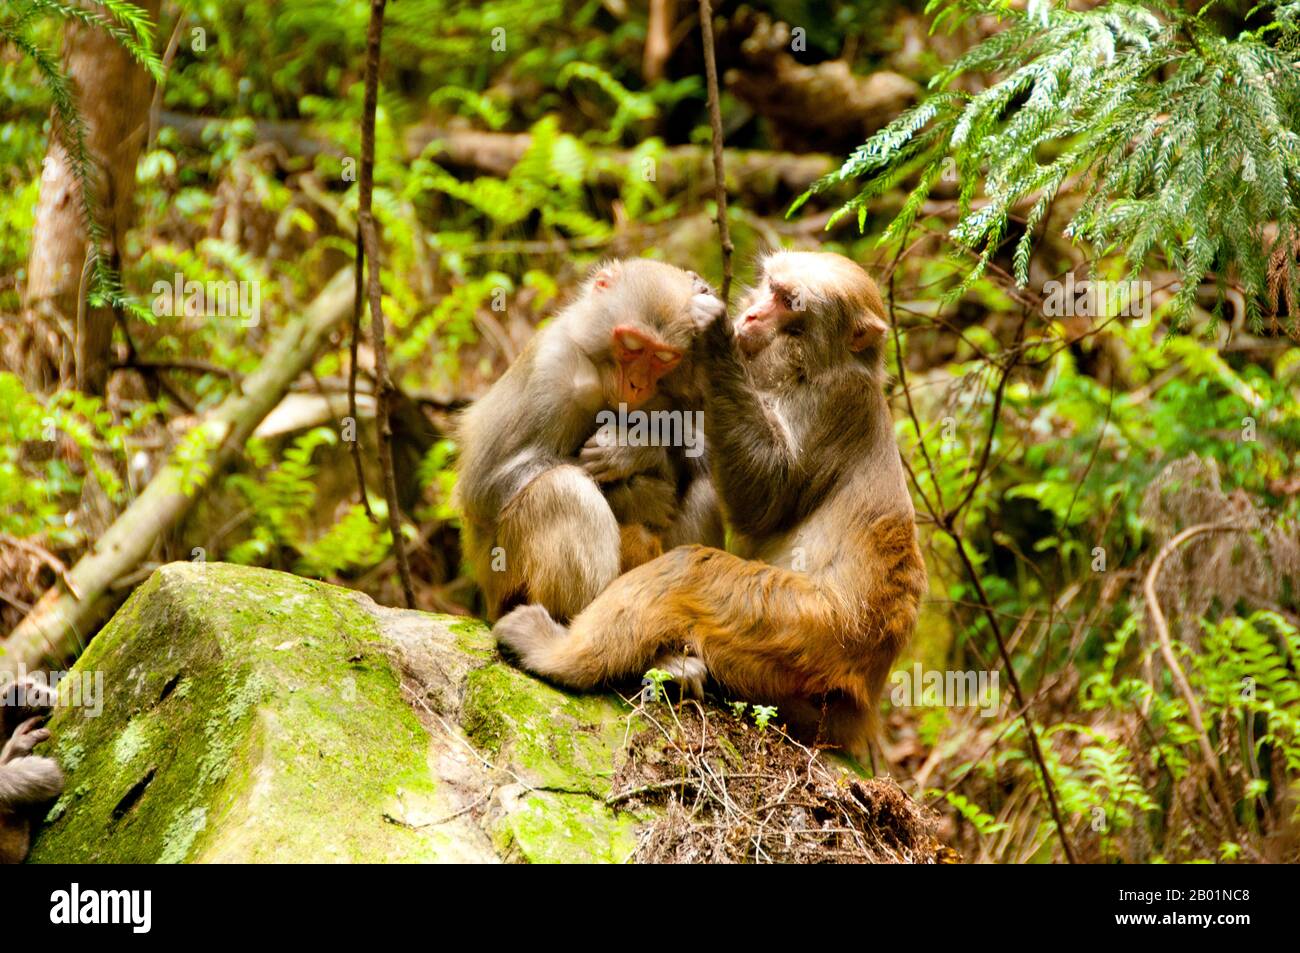 China: Rhesus monkeys (Macaca mulatta), Wulingyuan Scenic Area (Zhangjiajie), Hunan Province.  The Rhesus macaque (Macaca mulatta), also called the Rhesus monkey, is brown or grey in colour and has a pink face, which is bereft of fur. Its tail is of medium length and averages between 20.7 and 22.9 cm (8.1 and 9.0 in). Adult males measure approximately 53 cm (21 in) on average and weigh about 7.7 kg (17 lb). Females are smaller, averaging 47 cm (19 in) in length and 5.3 kg (12 lb) in weight.  It is listed as Least Concern in the IUCN Red List of Threatened Species. Stock Photo